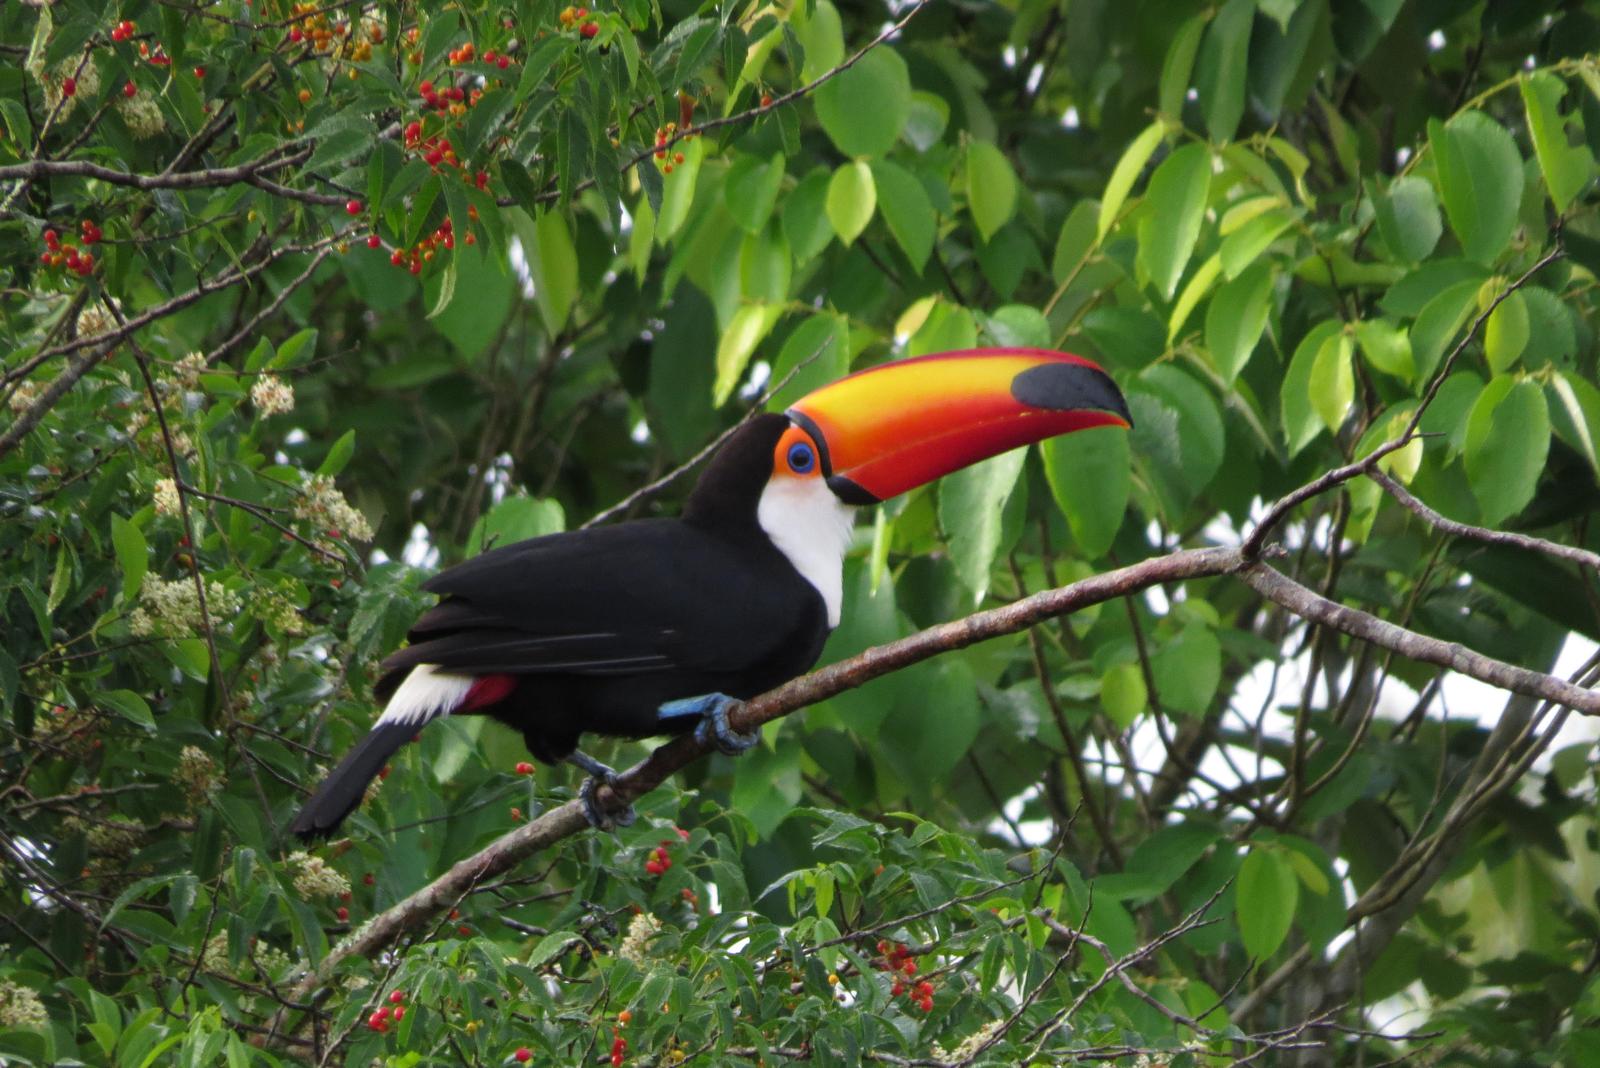 Toco Toucan Photo by Jeff Harding